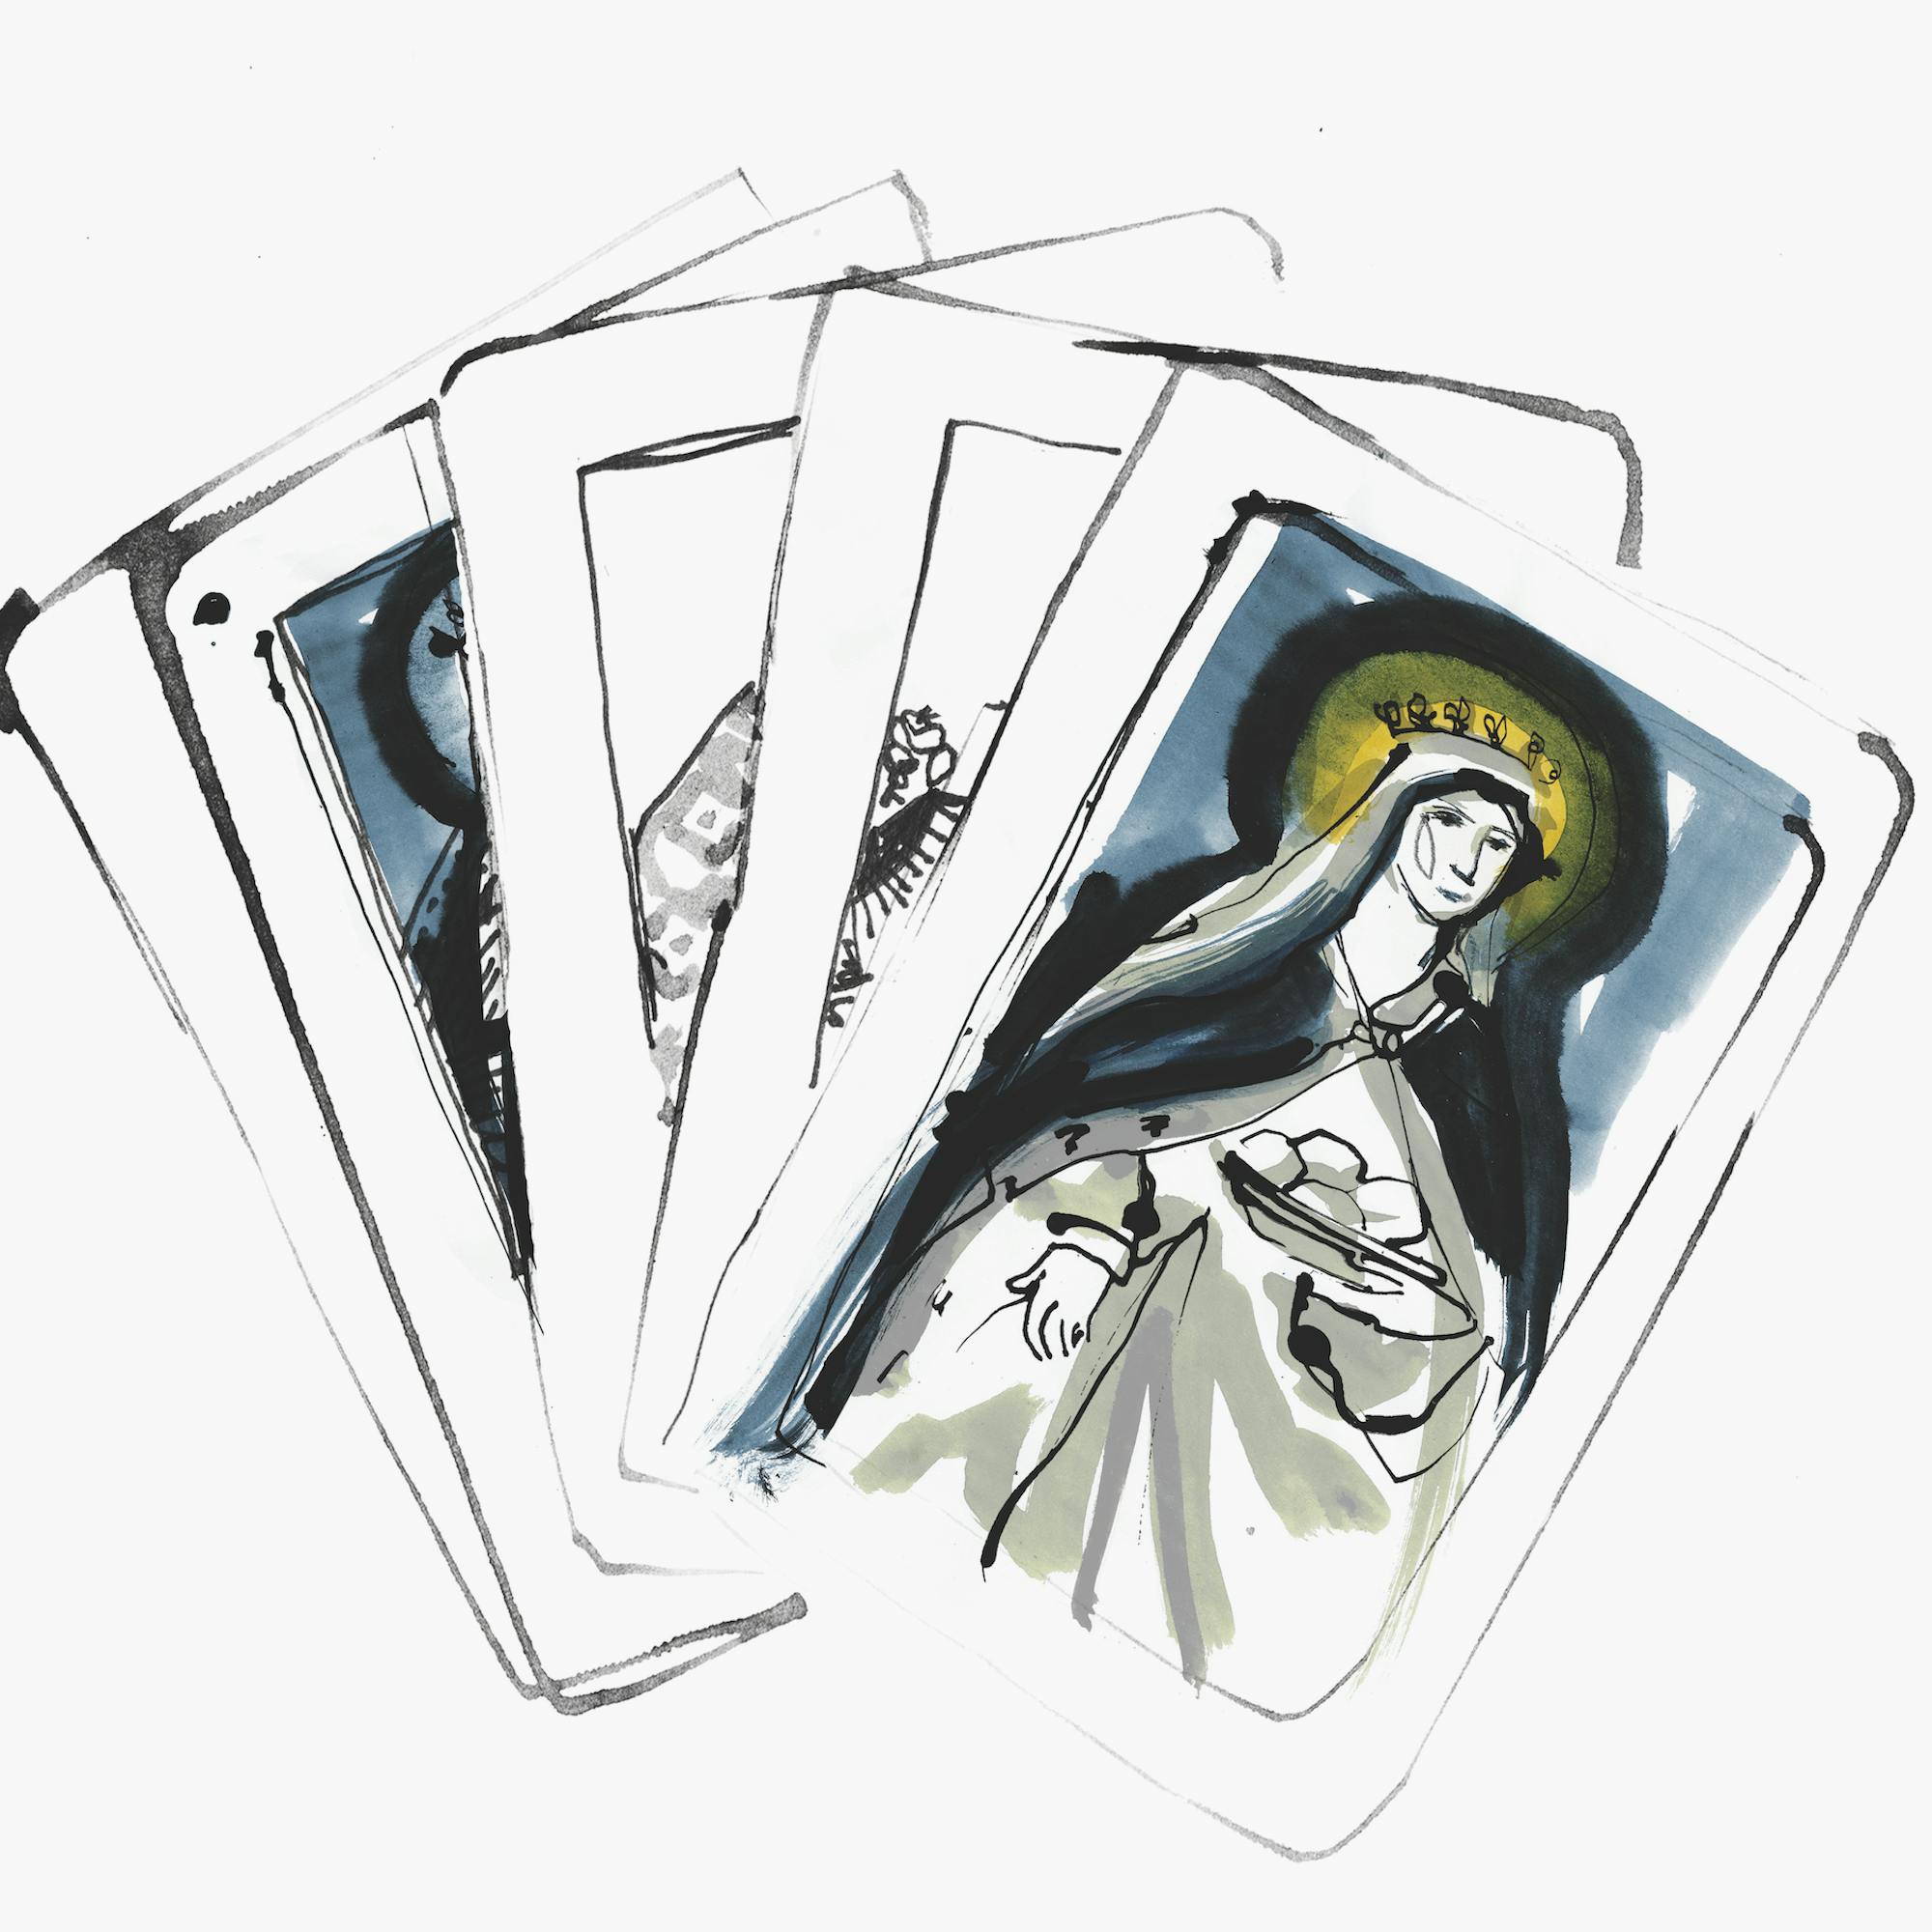 Some cards with a religious-looking lady painted in navy and yellow.